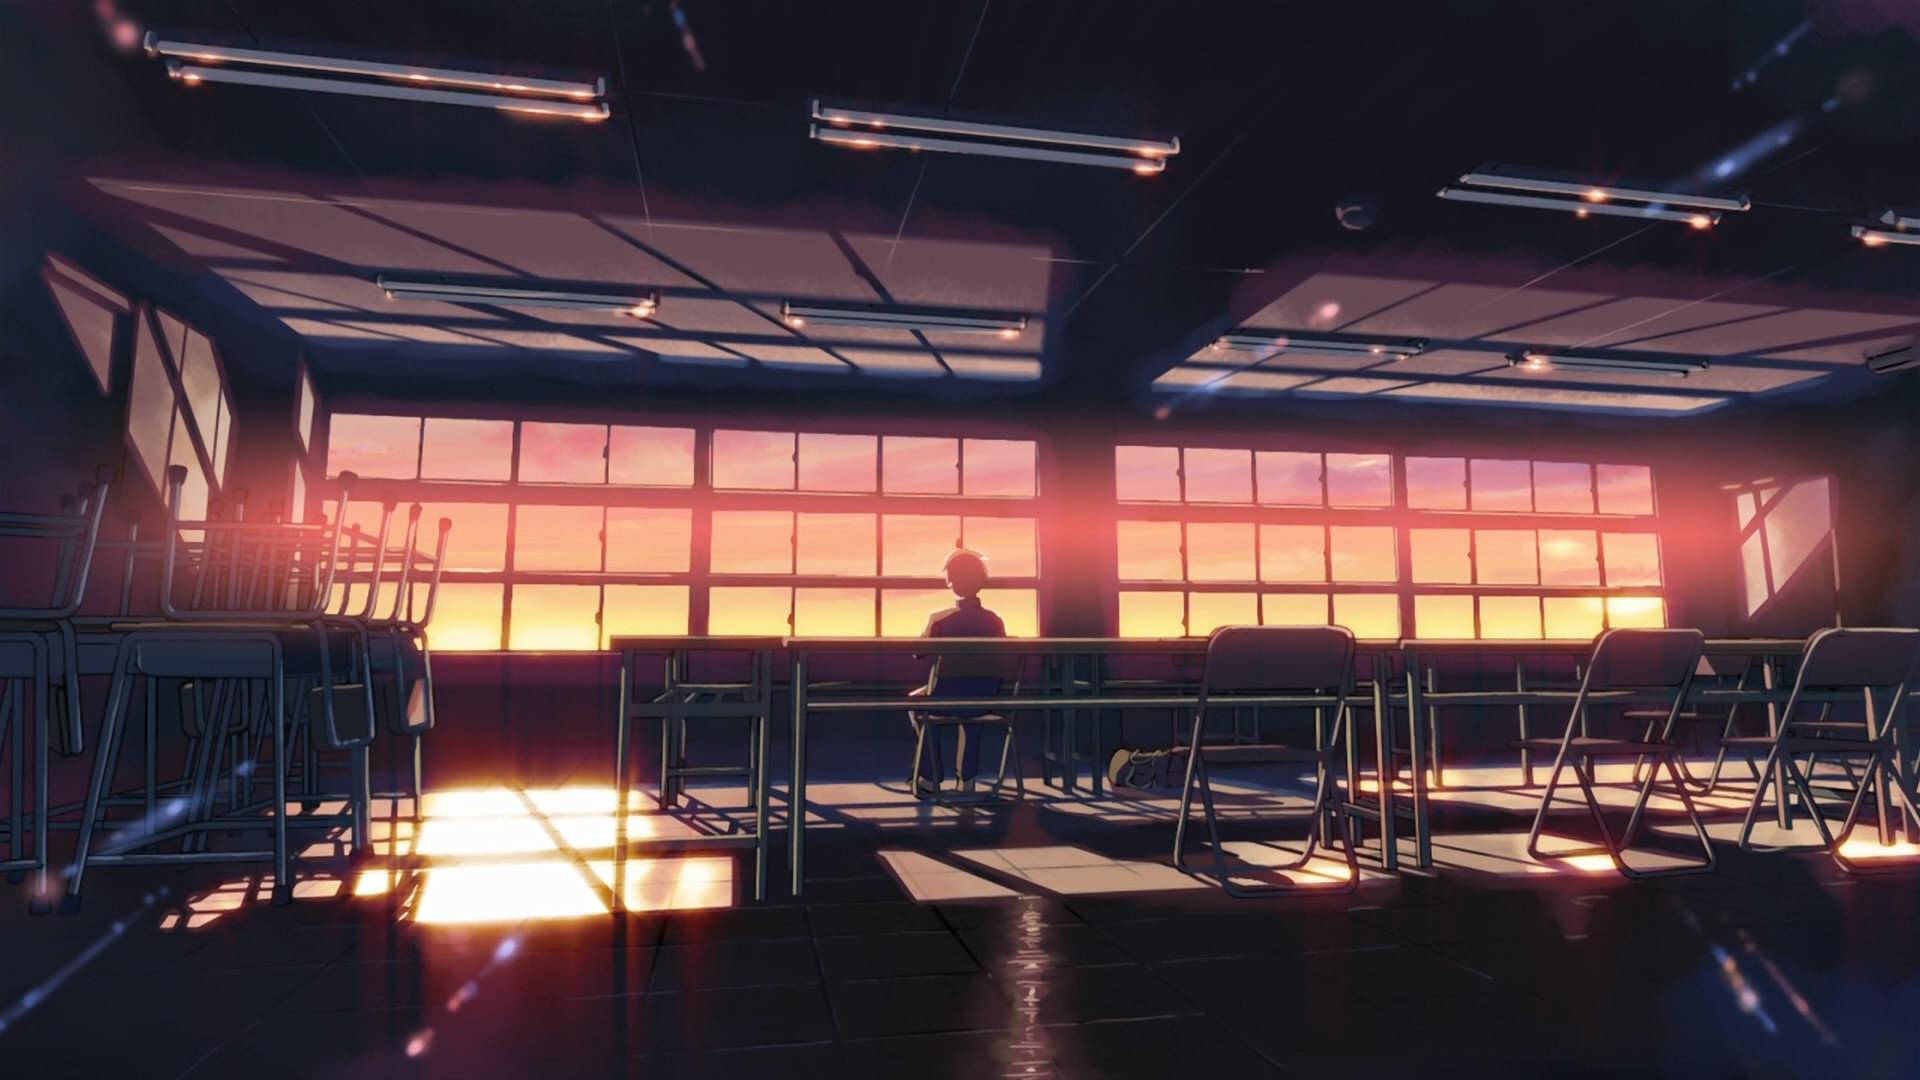 Anime School Scenery Student In Classroom After Hours